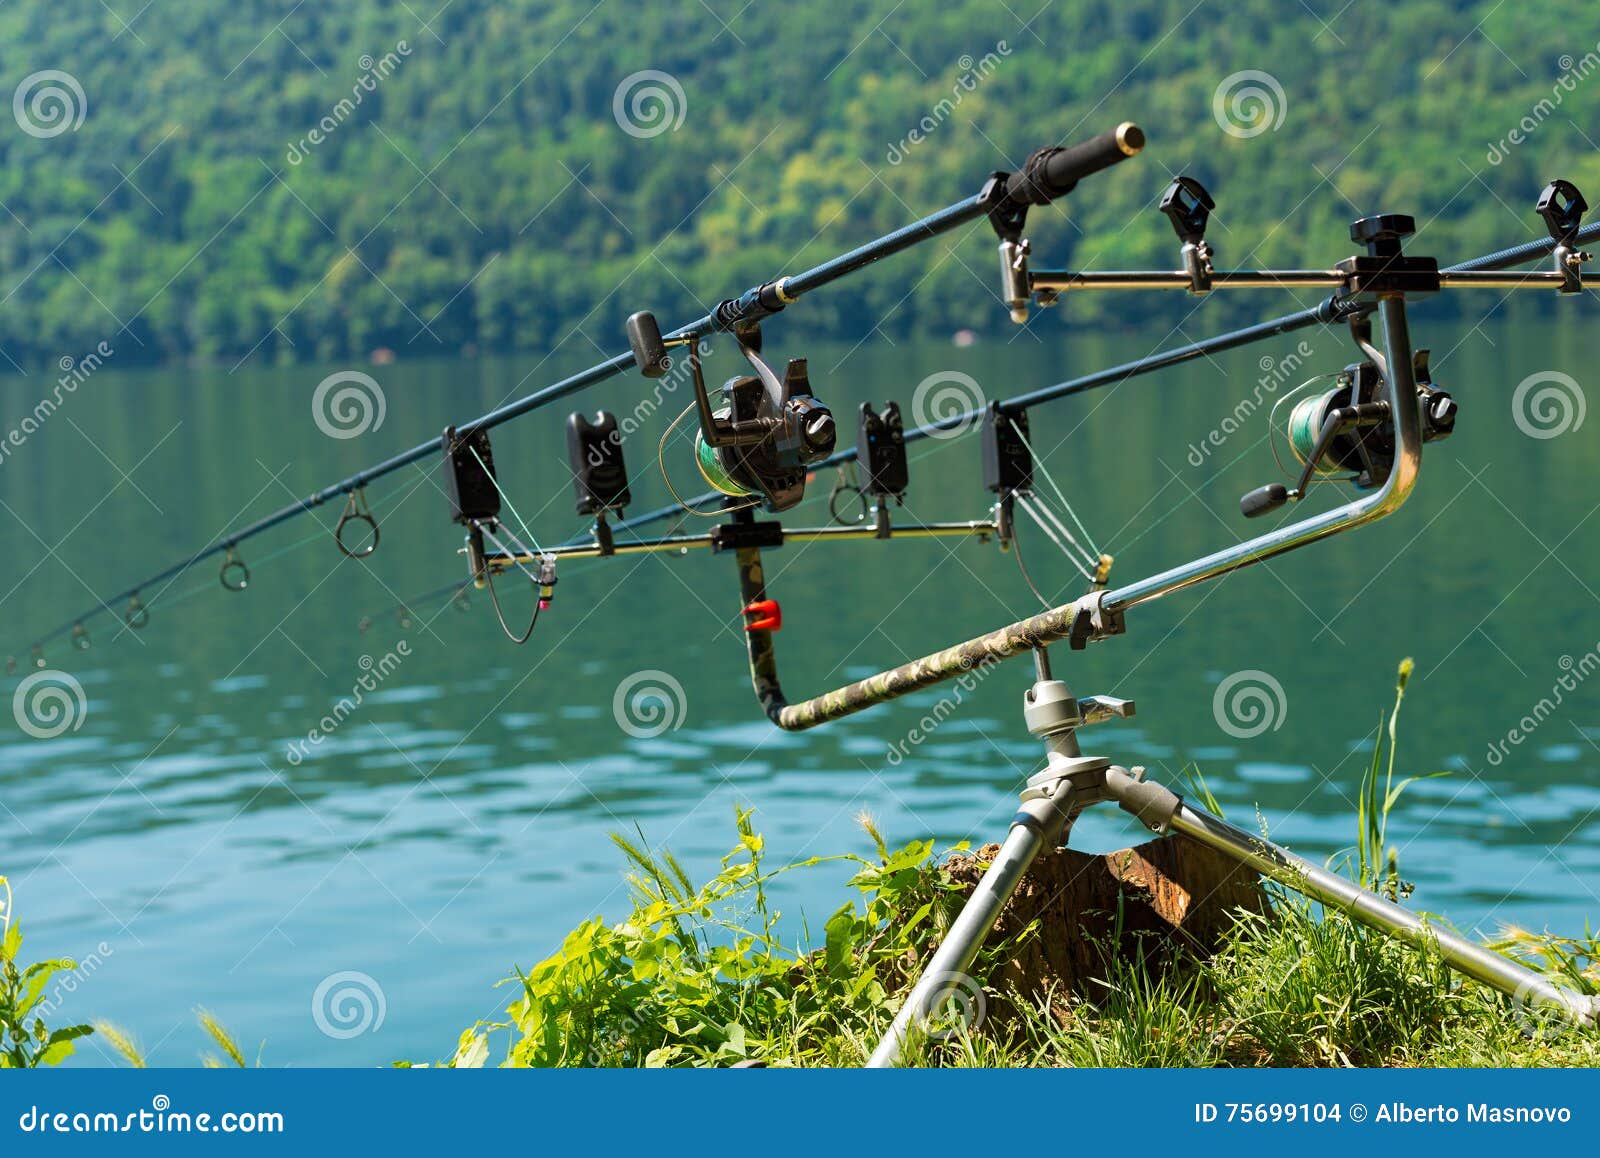 Carp Fishing Rods with Reel on Support System Stock Photo - Image